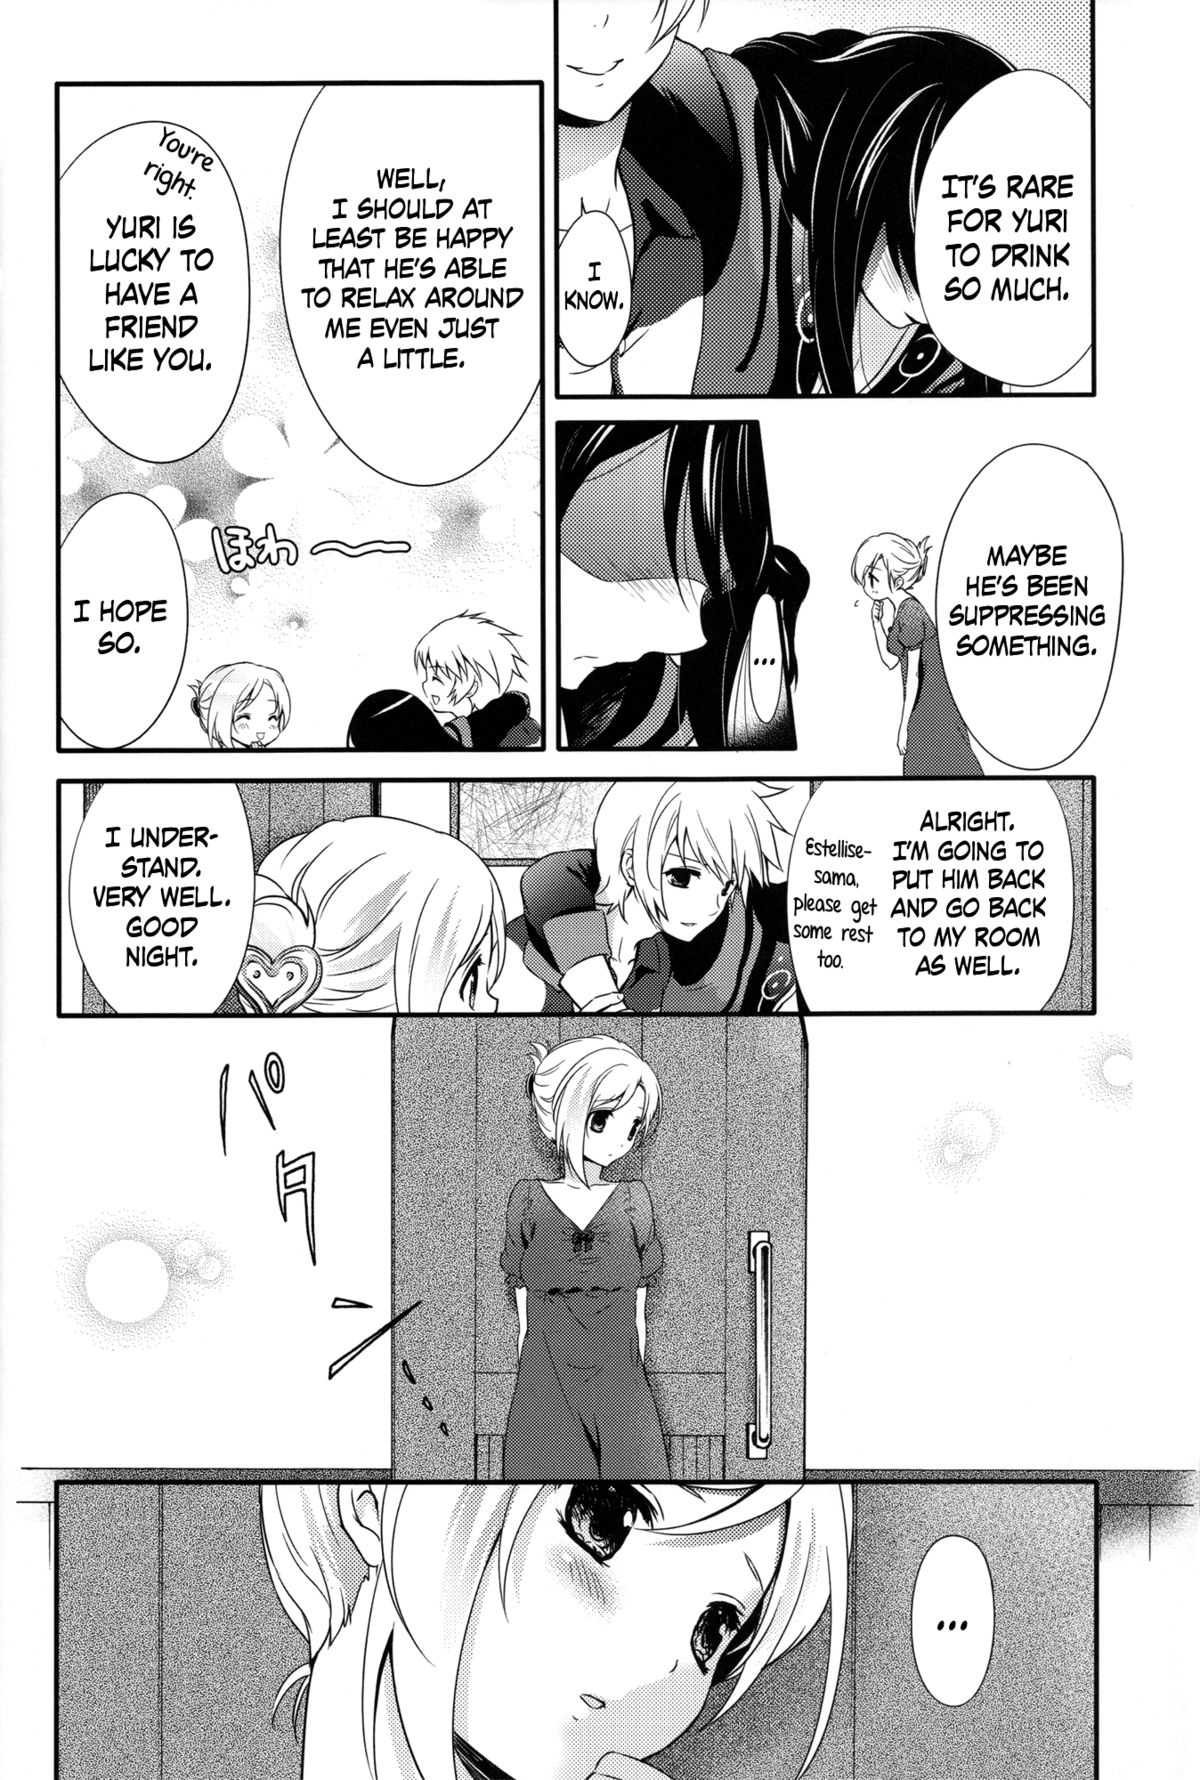 (C81) [Holiday School (Chikaya)] Love is Blind (Tales of Vesperia) [English] =TV= page 5 full